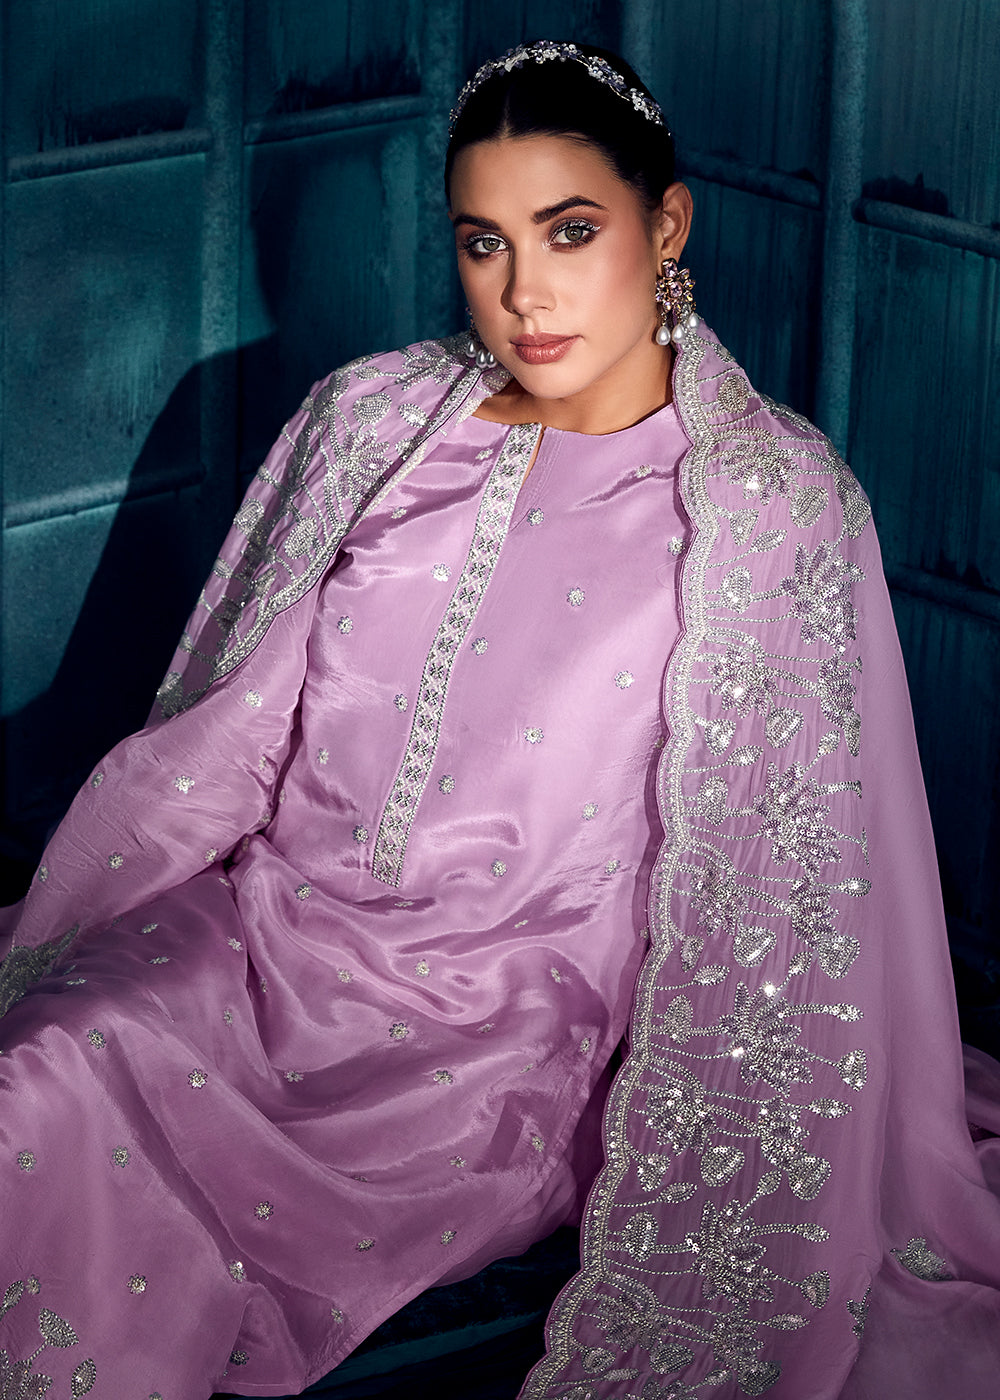 Buy Now Lilac Pink Modale Silk Embroidered Festive Salwar Suit Online in USA, UK, Canada, Germany, Australia & Worldwide at Empress Clothing.